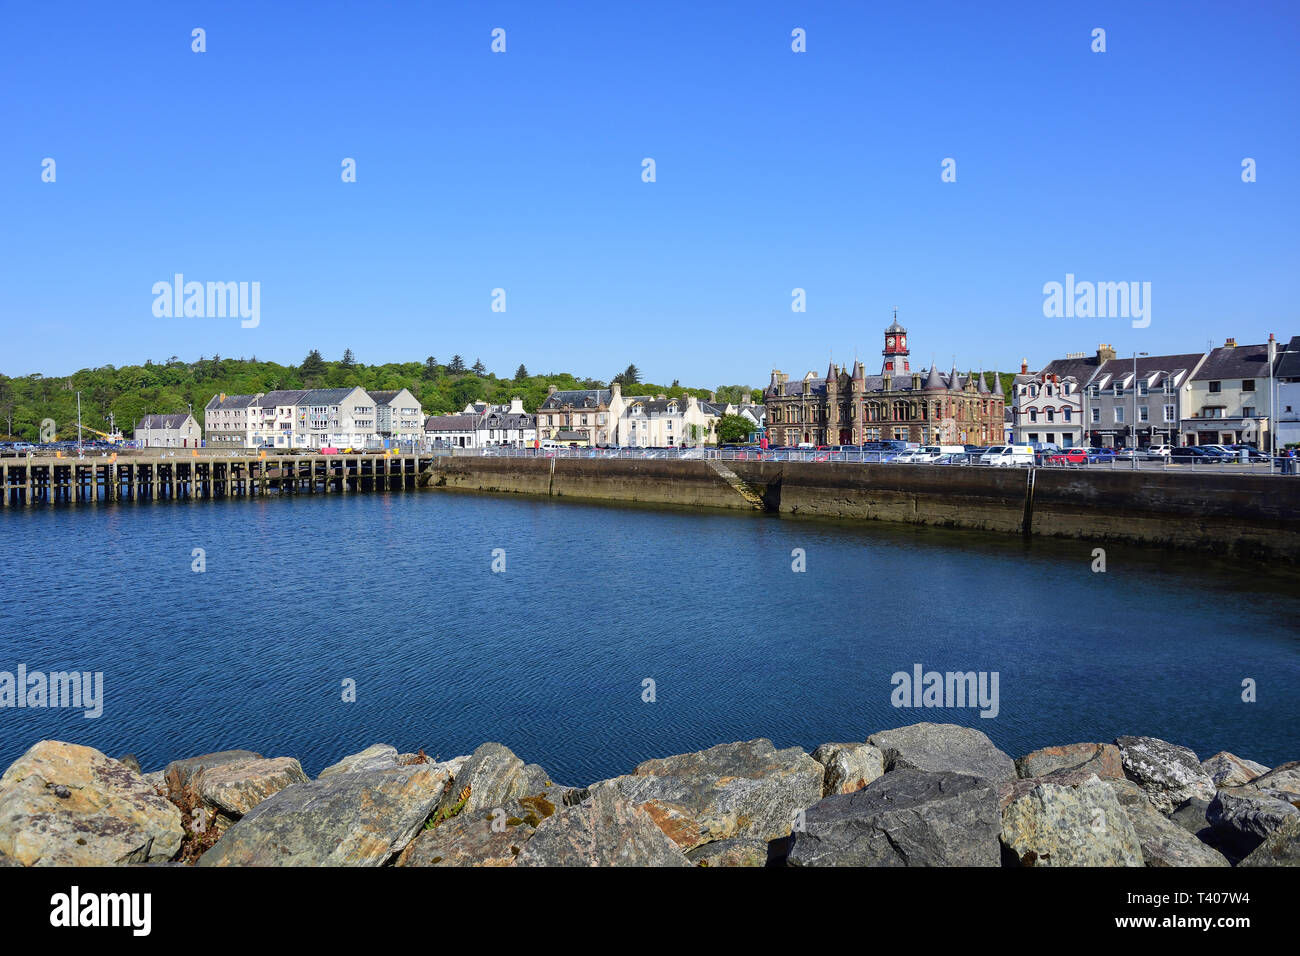 Stornoway seafront showing Town Hall, South Beach, Stornoway, Isle of Lewis, Outer Hebrides, Scotland, United Kingdom Stock Photo